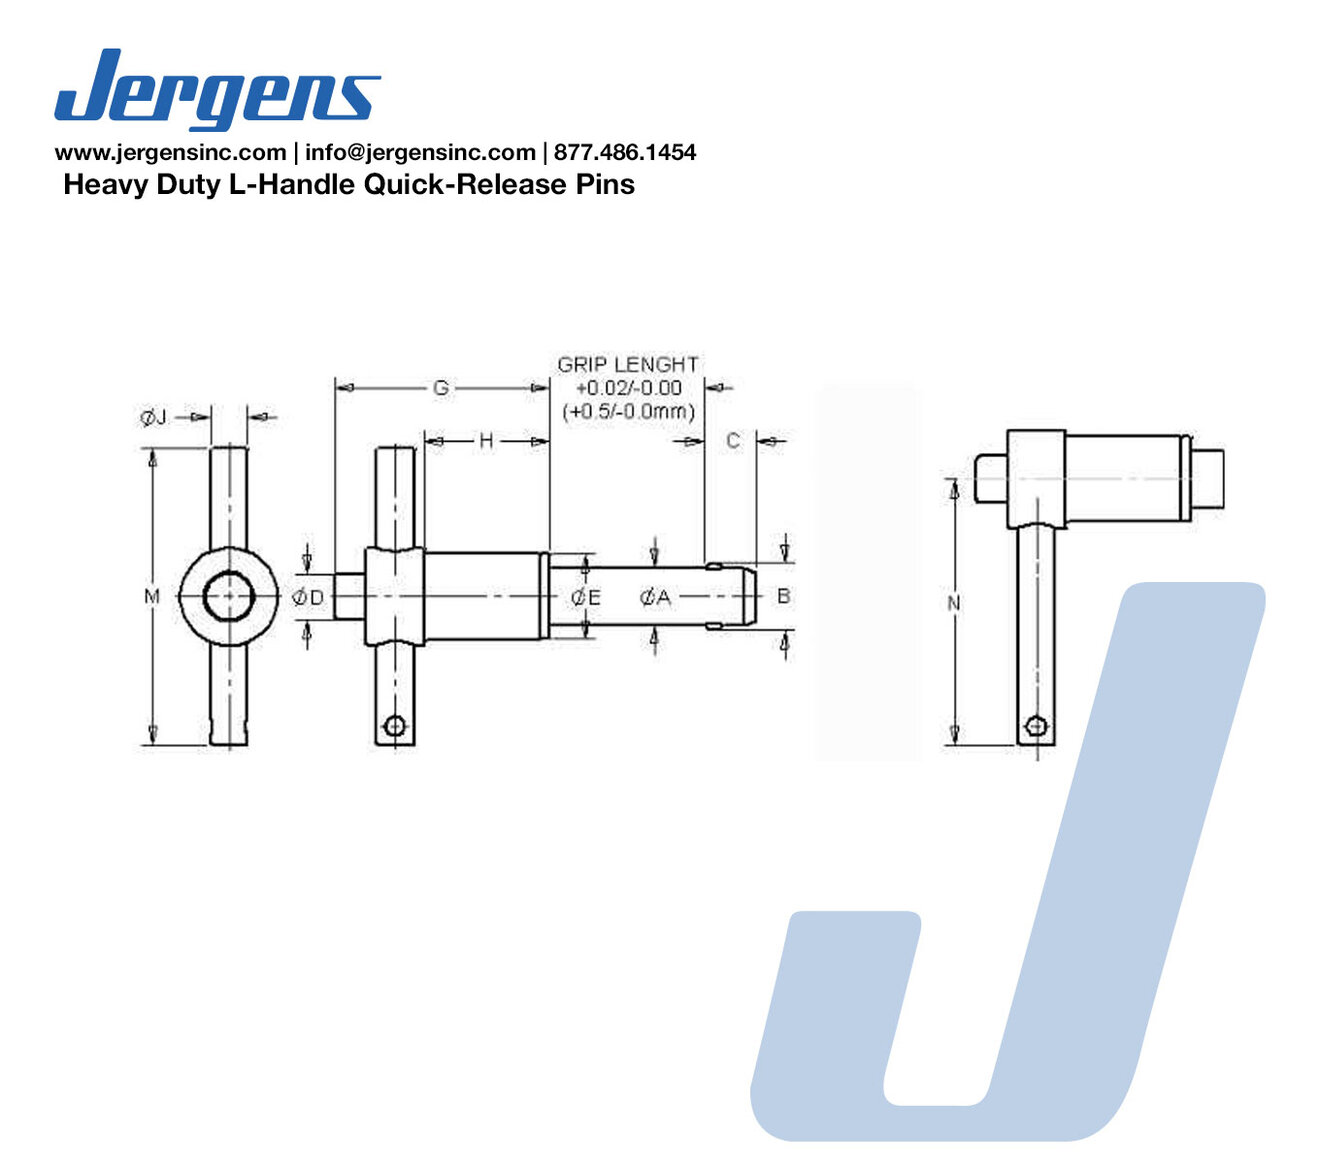 Heavy Duty T-Handle Quick-Release Pins| Jergens Specialty Fasteners